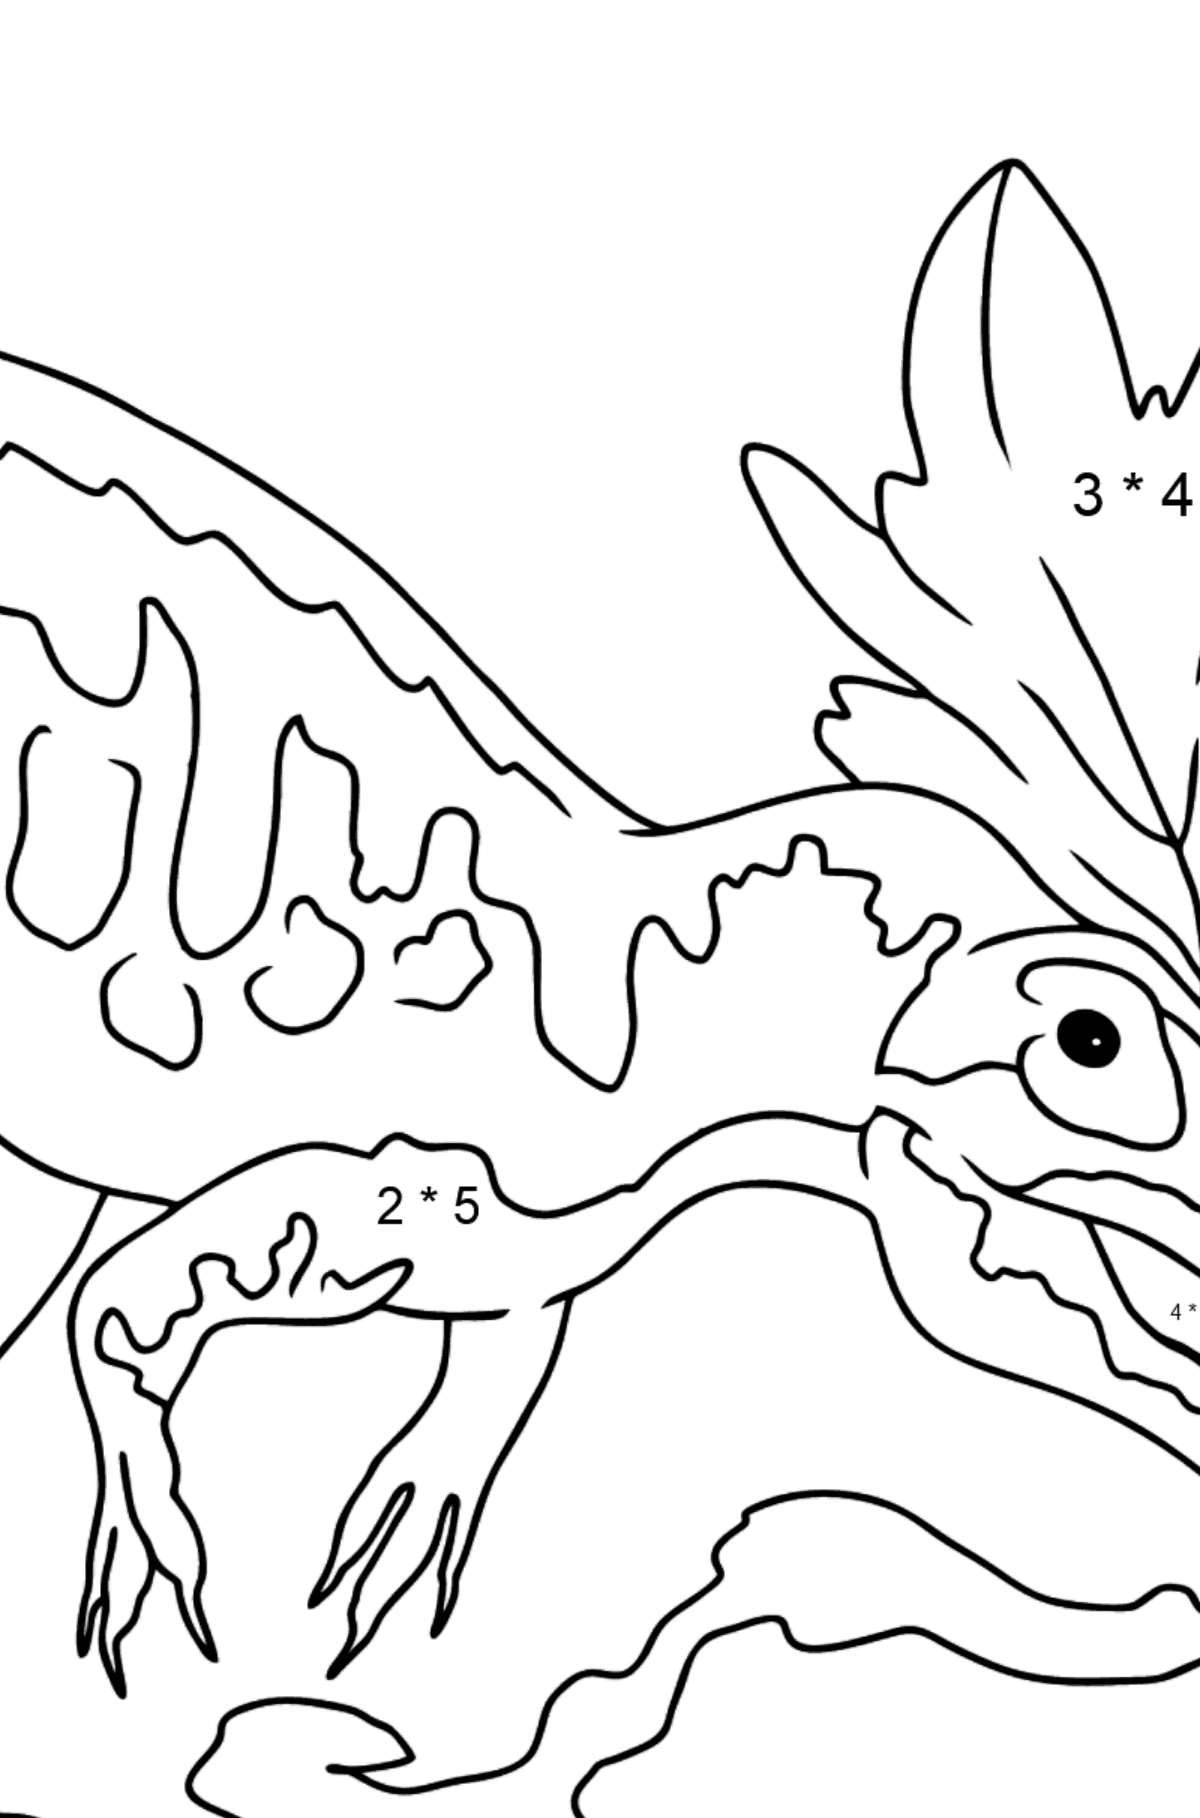 Allosaurus Coloring Page - Math Coloring - Multiplication for Kids